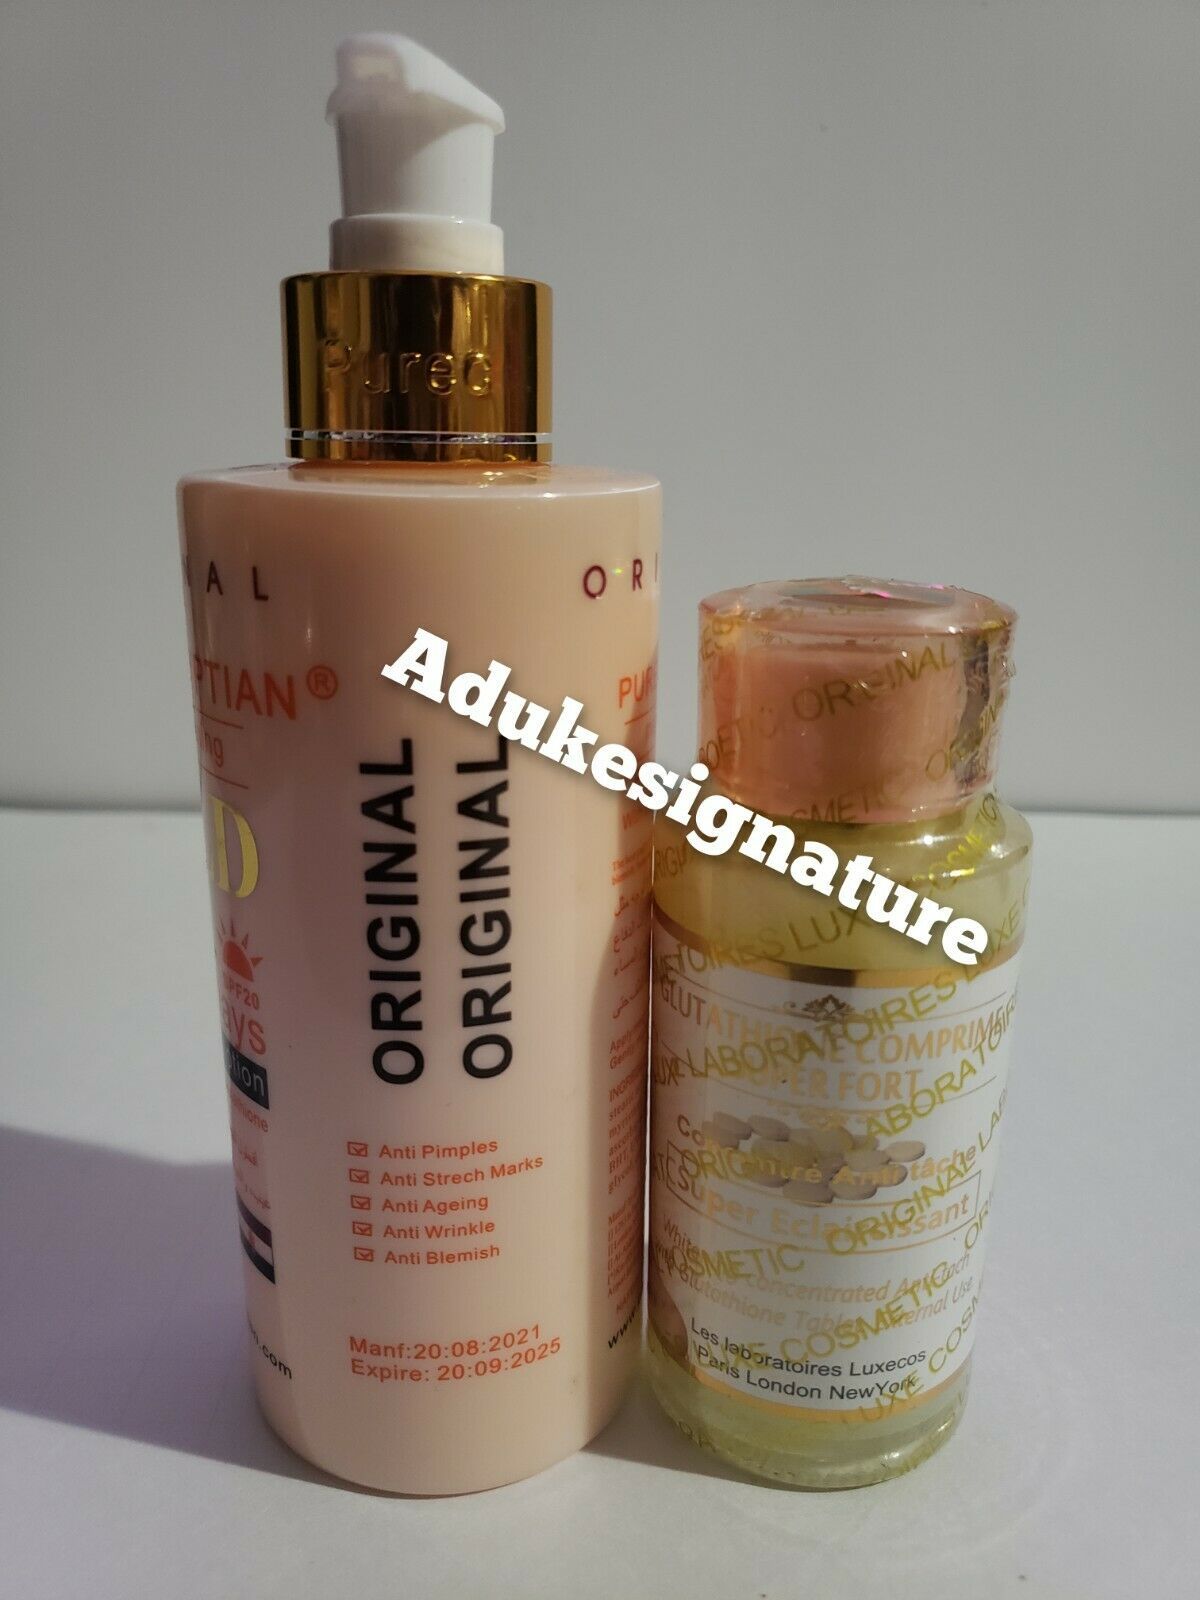 Primary image for purec egyptian magic whitening gold lotion and glutathione comprime serum